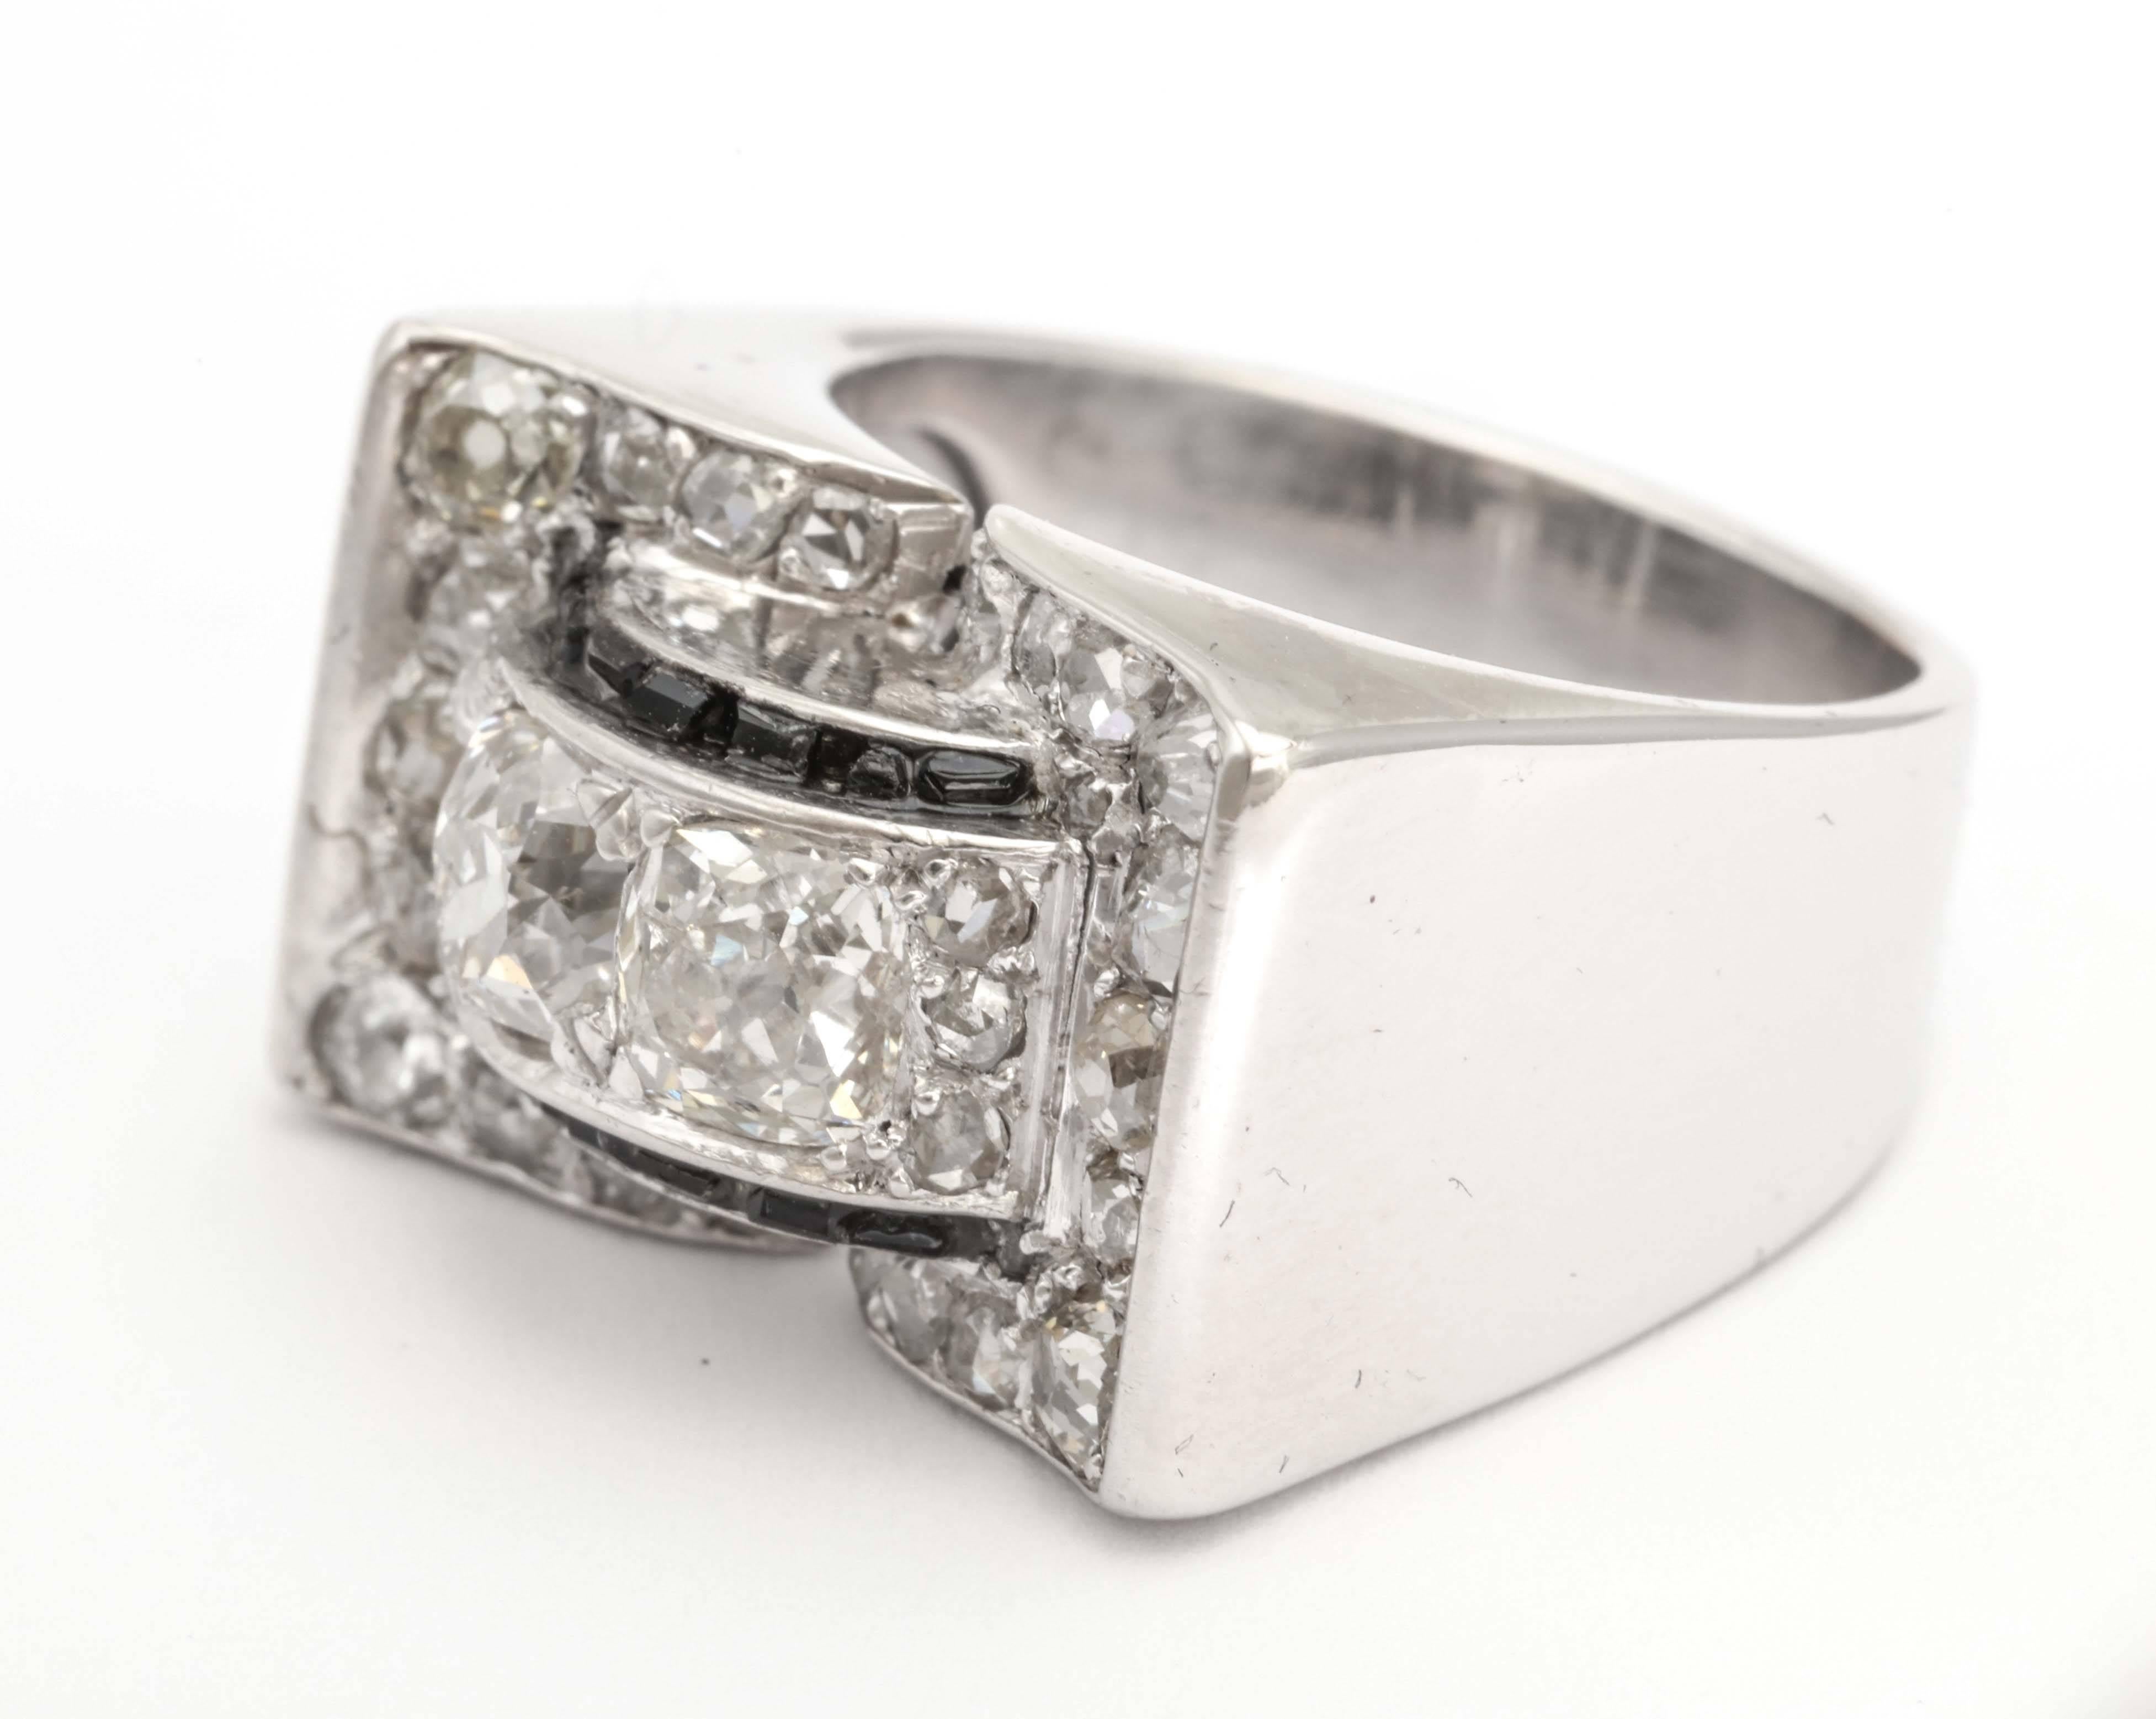 A fabulous french retro diamond ring in white gold with onyx baguettes